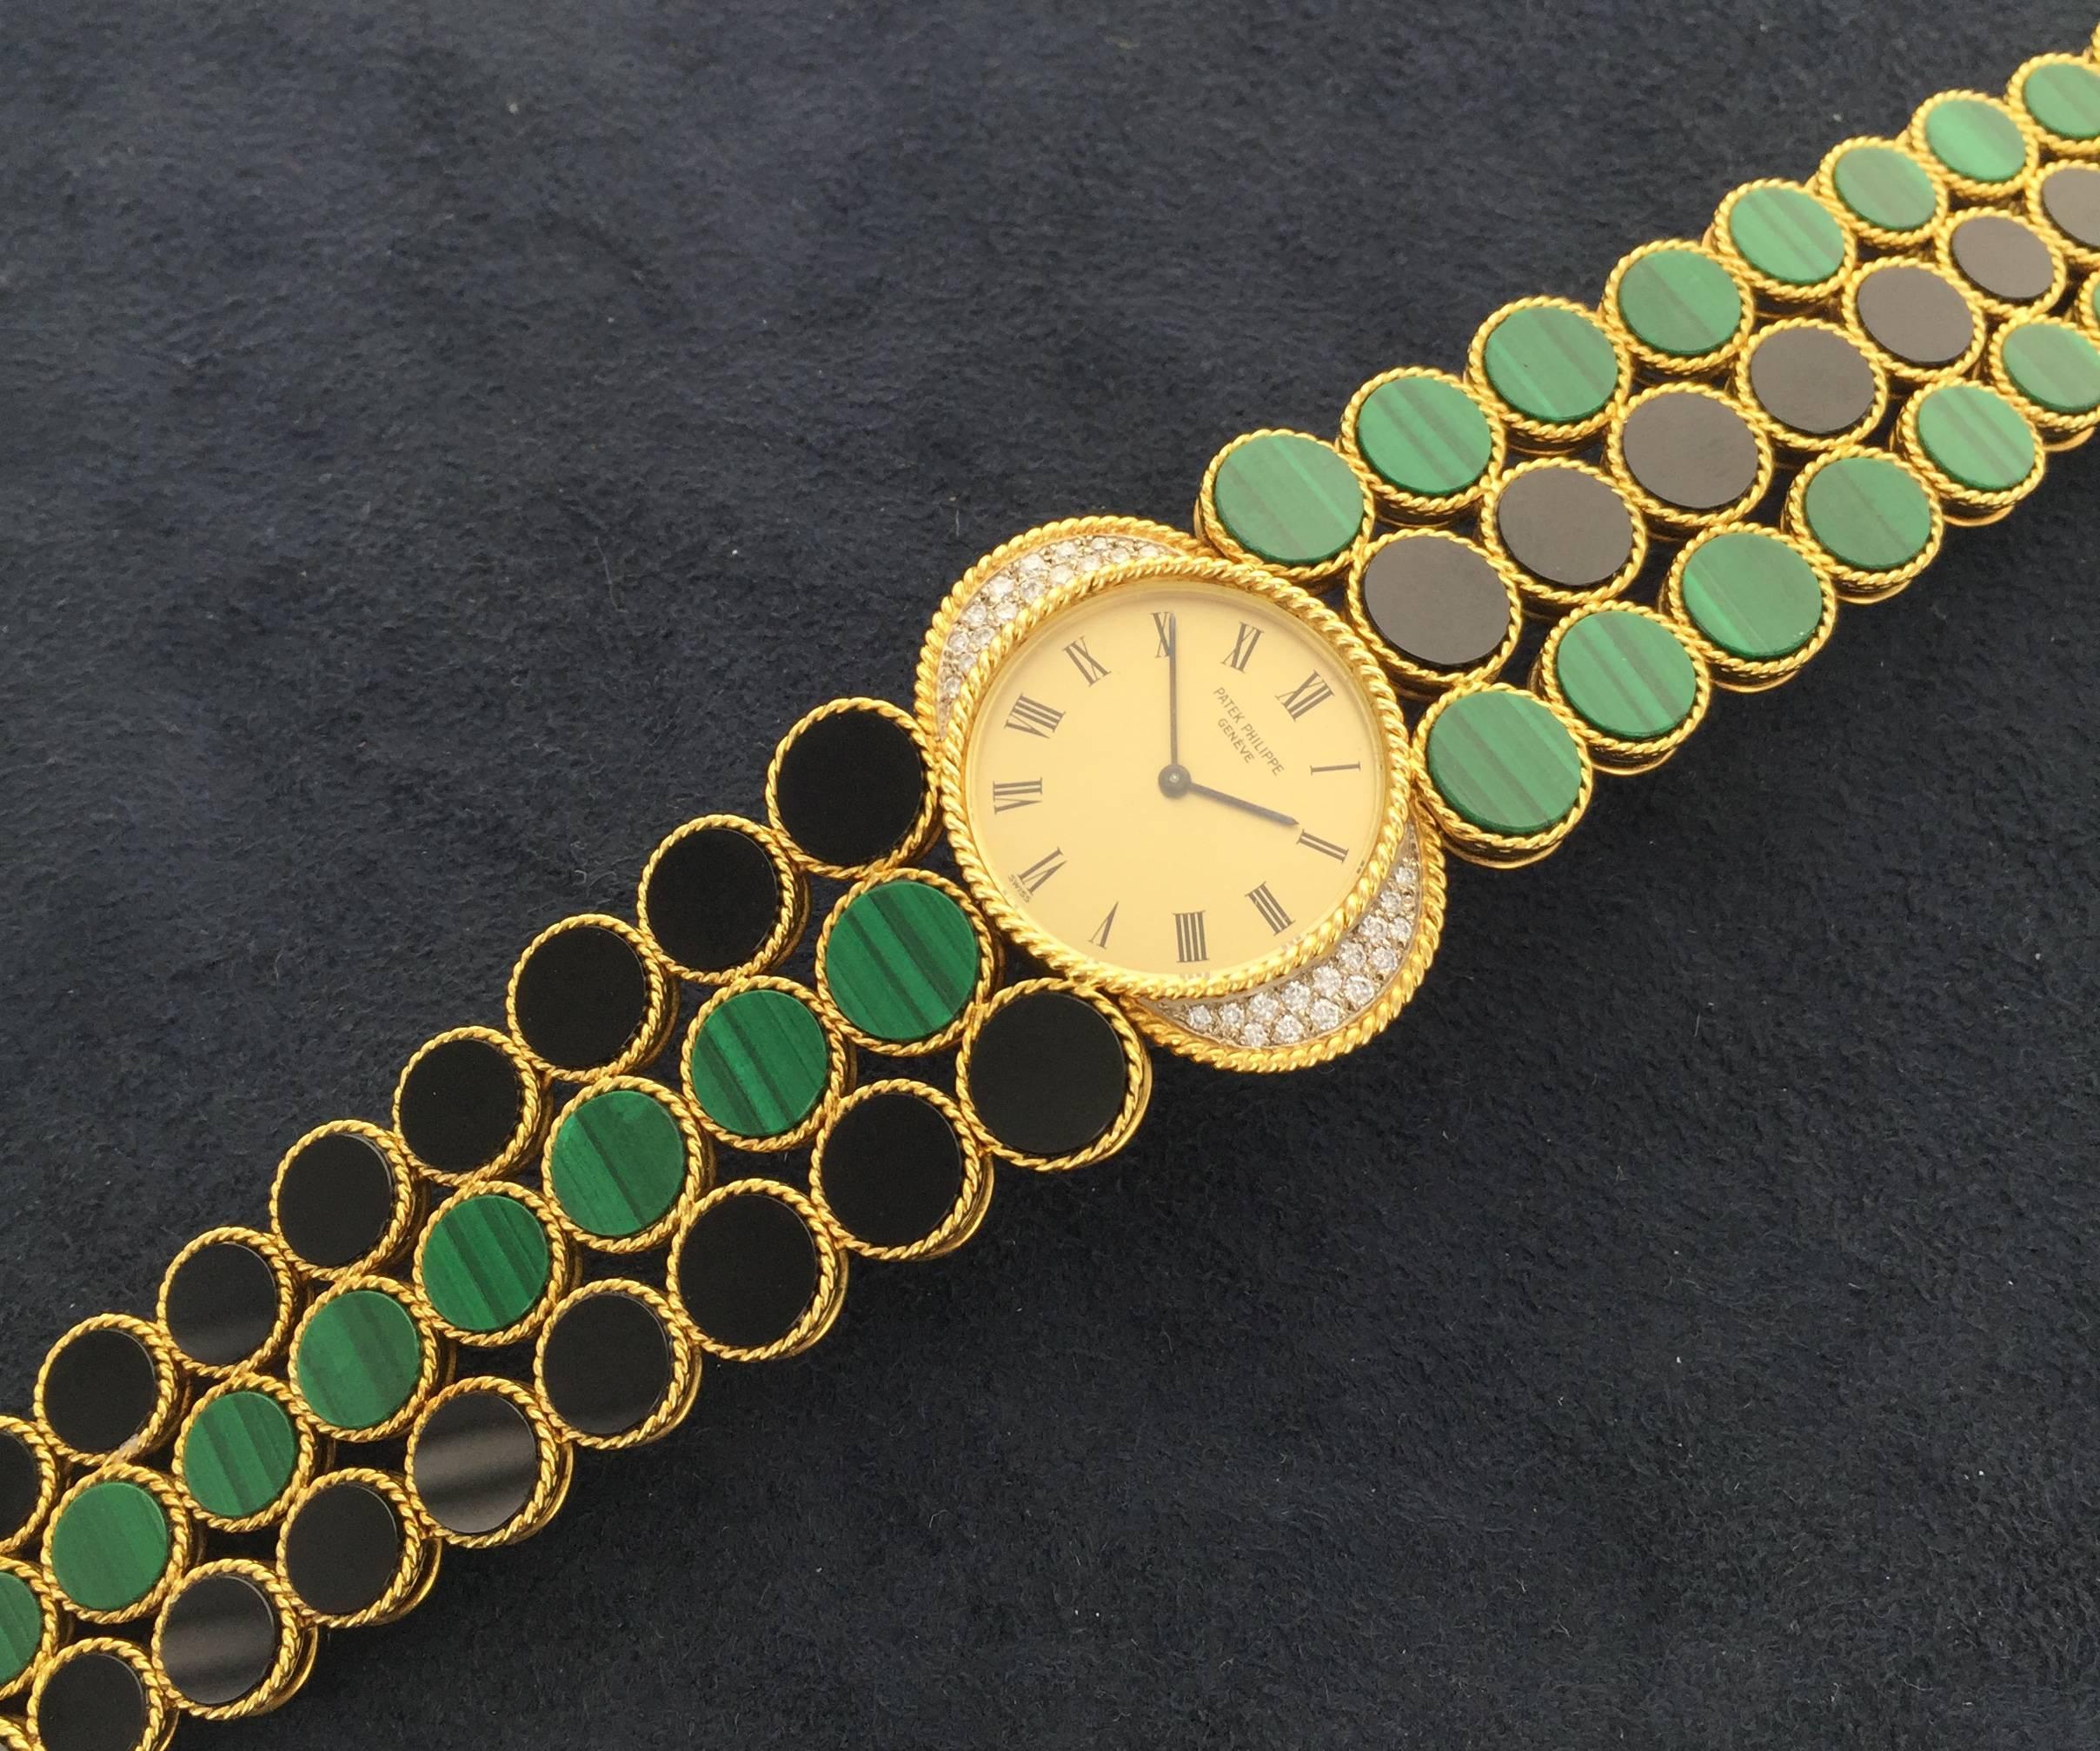 Manufactured in 1976, this rare Patek Philippe is an amazingly stylish and decorative jewelry watch. 18k yellow gold with integrated three strand bracelet with black onyx and malachite-set links. Diamond-set bezel with rope-twist